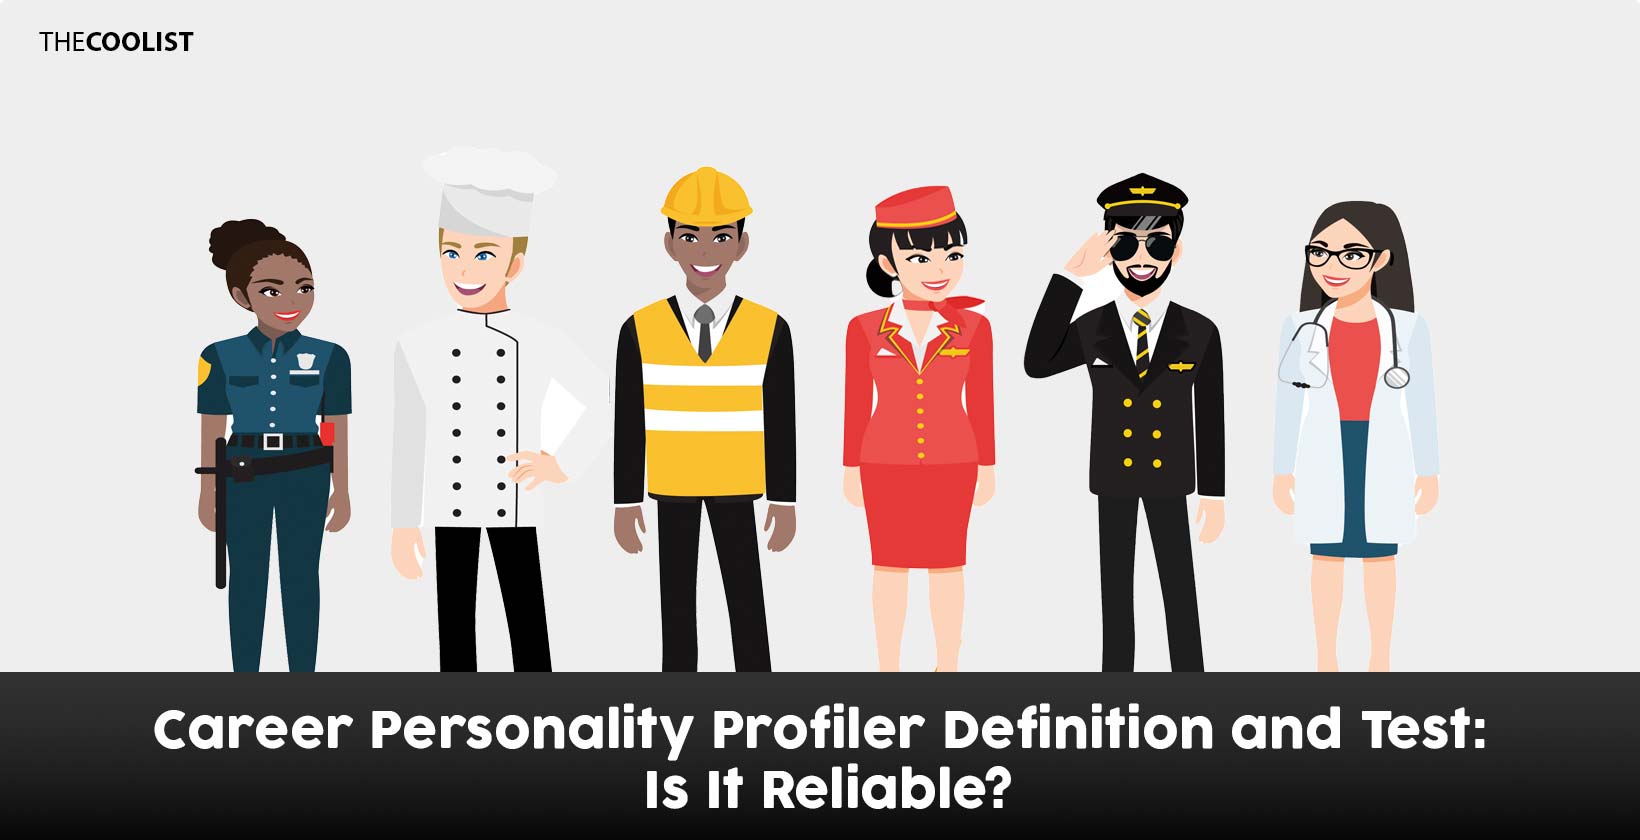 Career Personality Profiler Definition and Test: Is It Reliable?